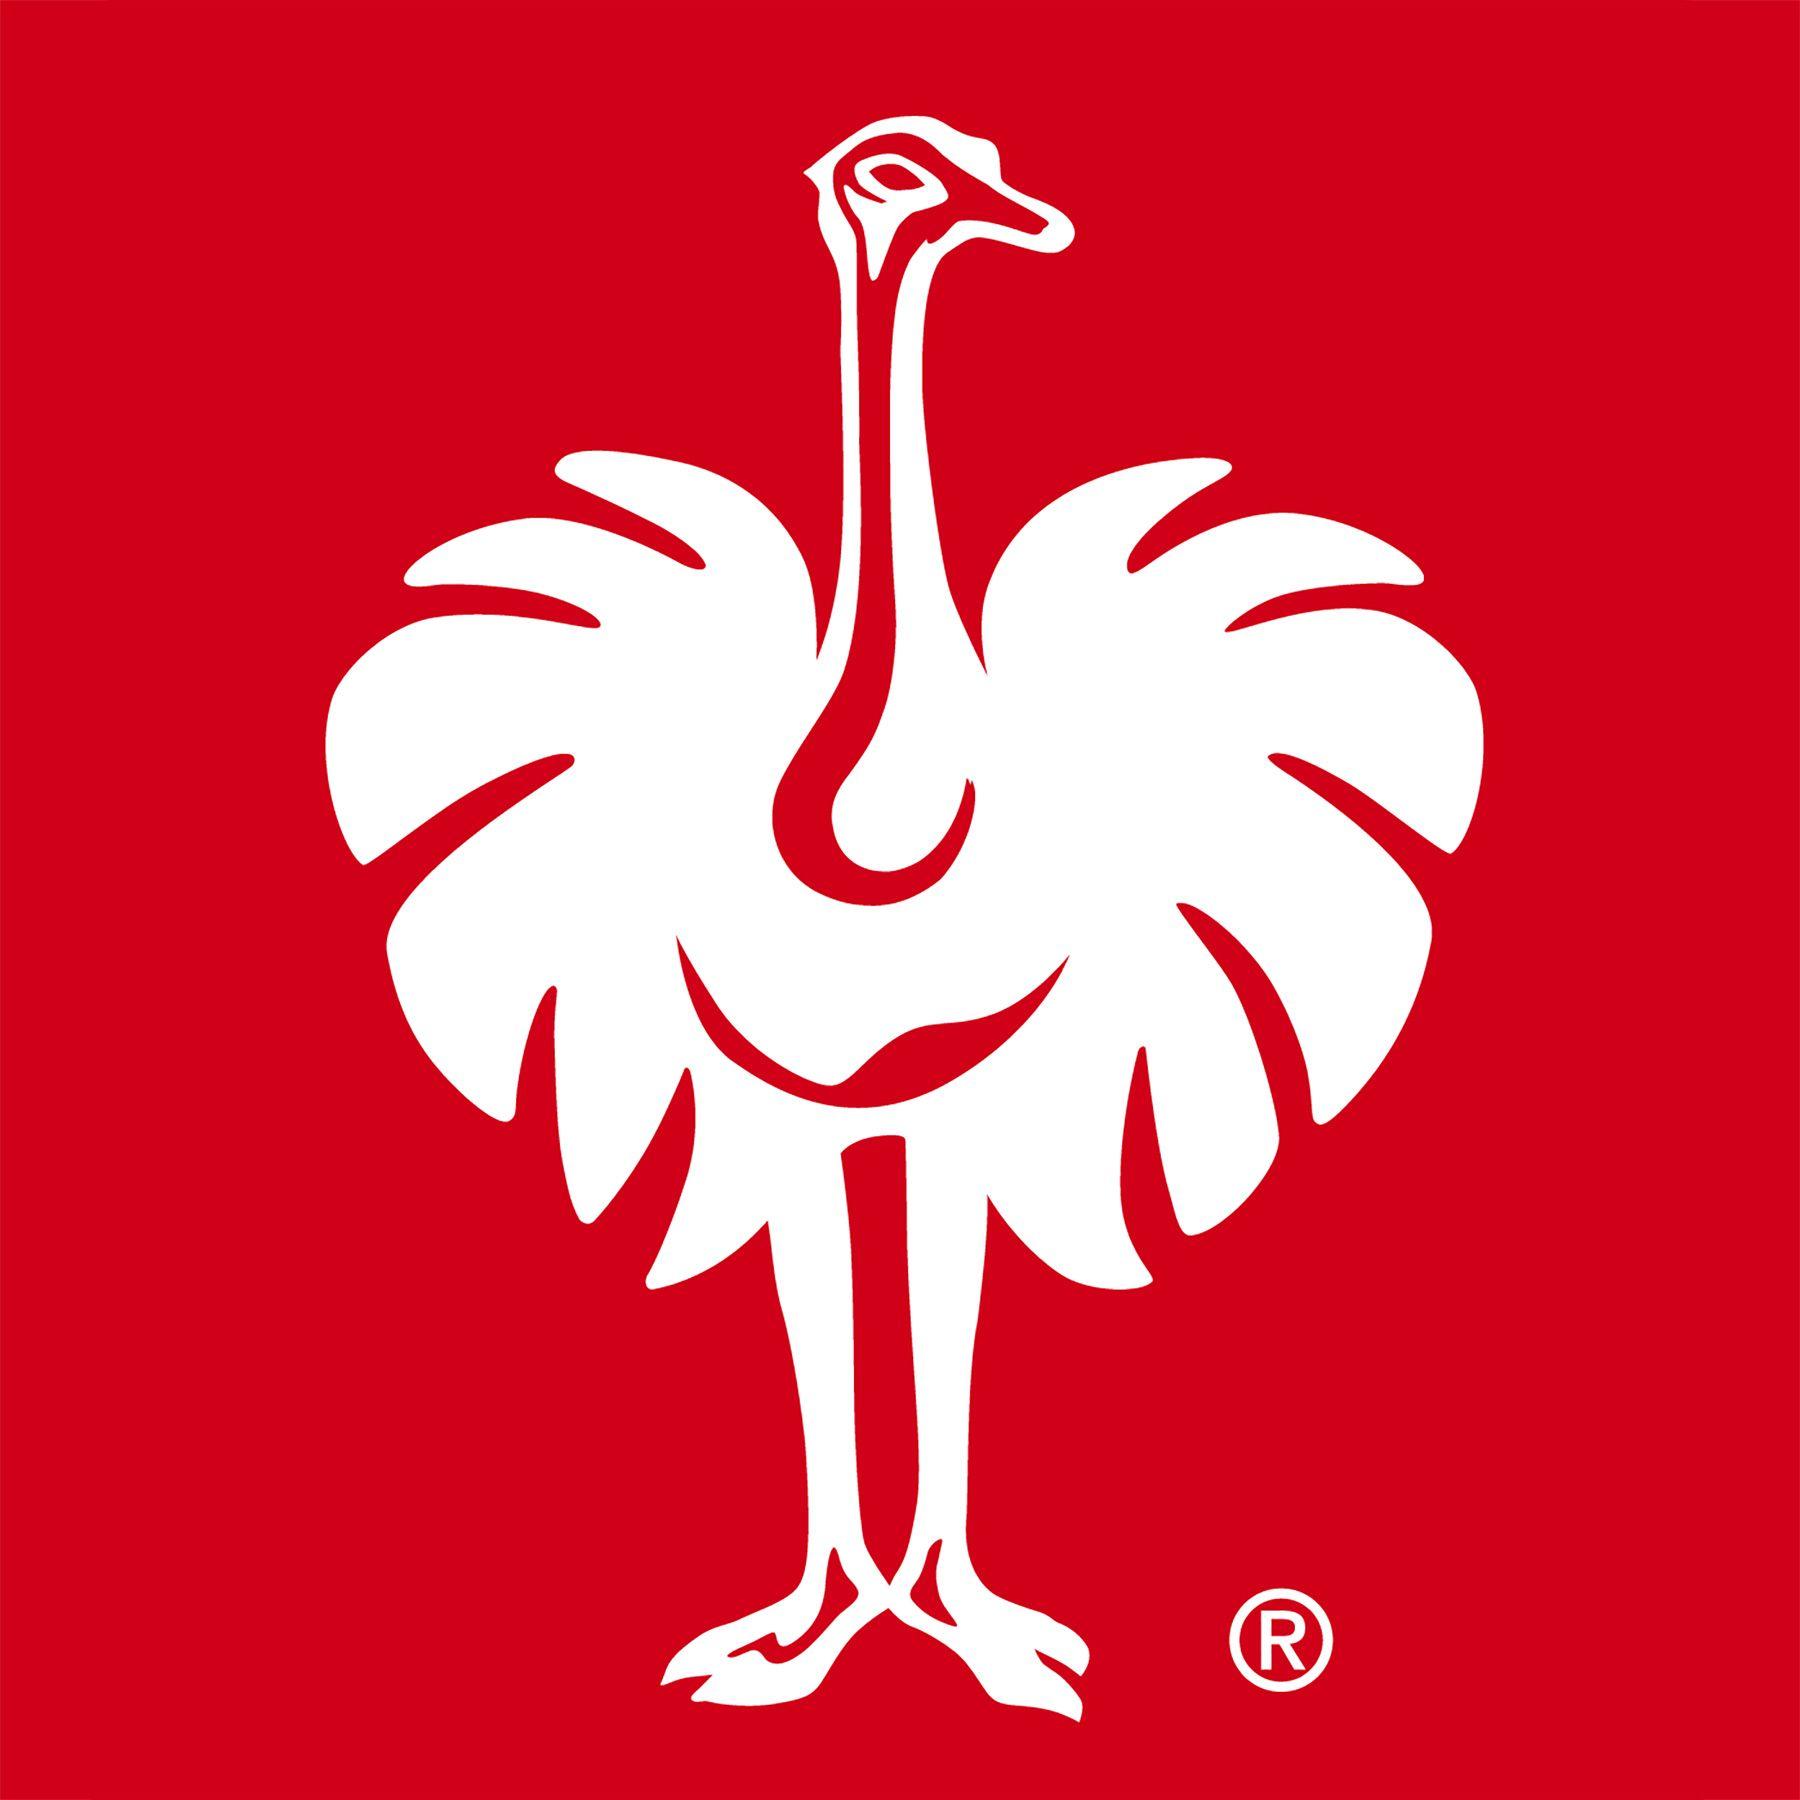 Red Ostrich Logo - Workwearstore Oberhausen Flagship Store